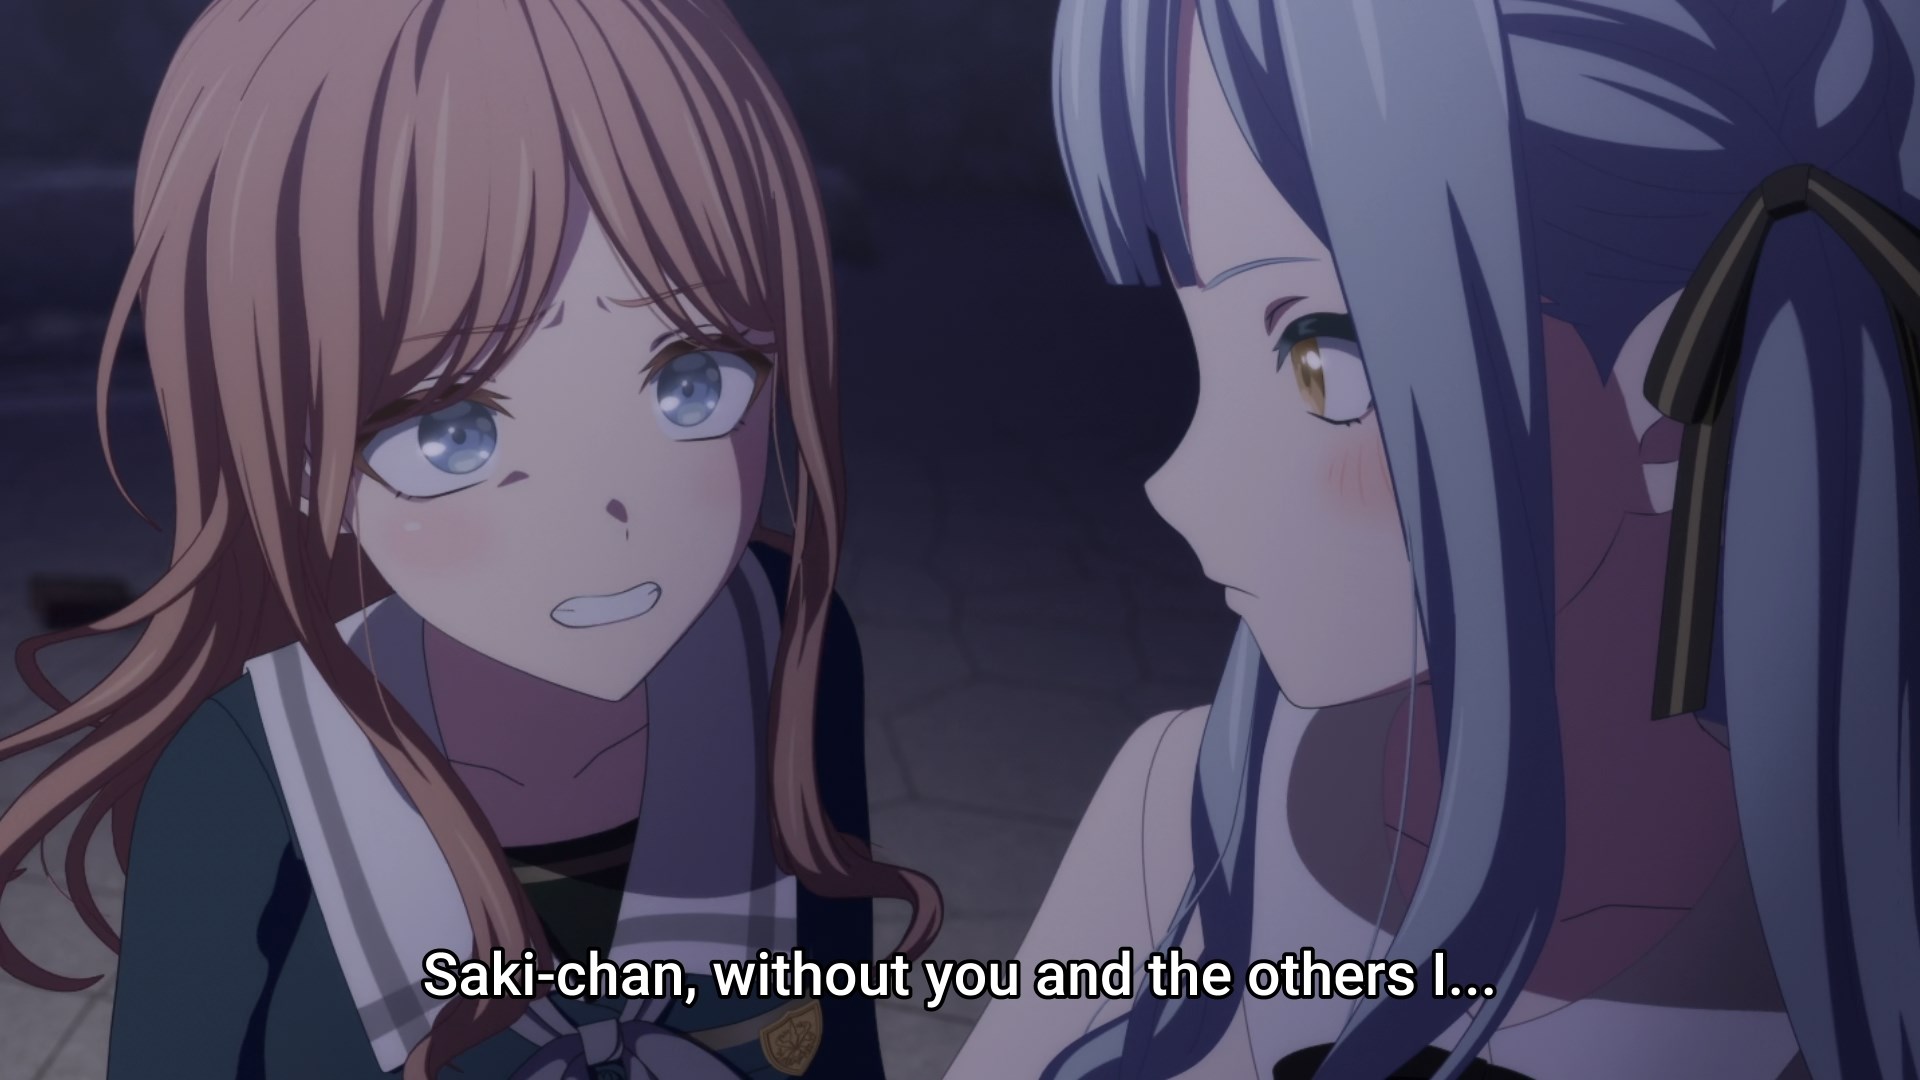 Soyo tearfully tugging on Saki's arm, imploring she needs her and the others.